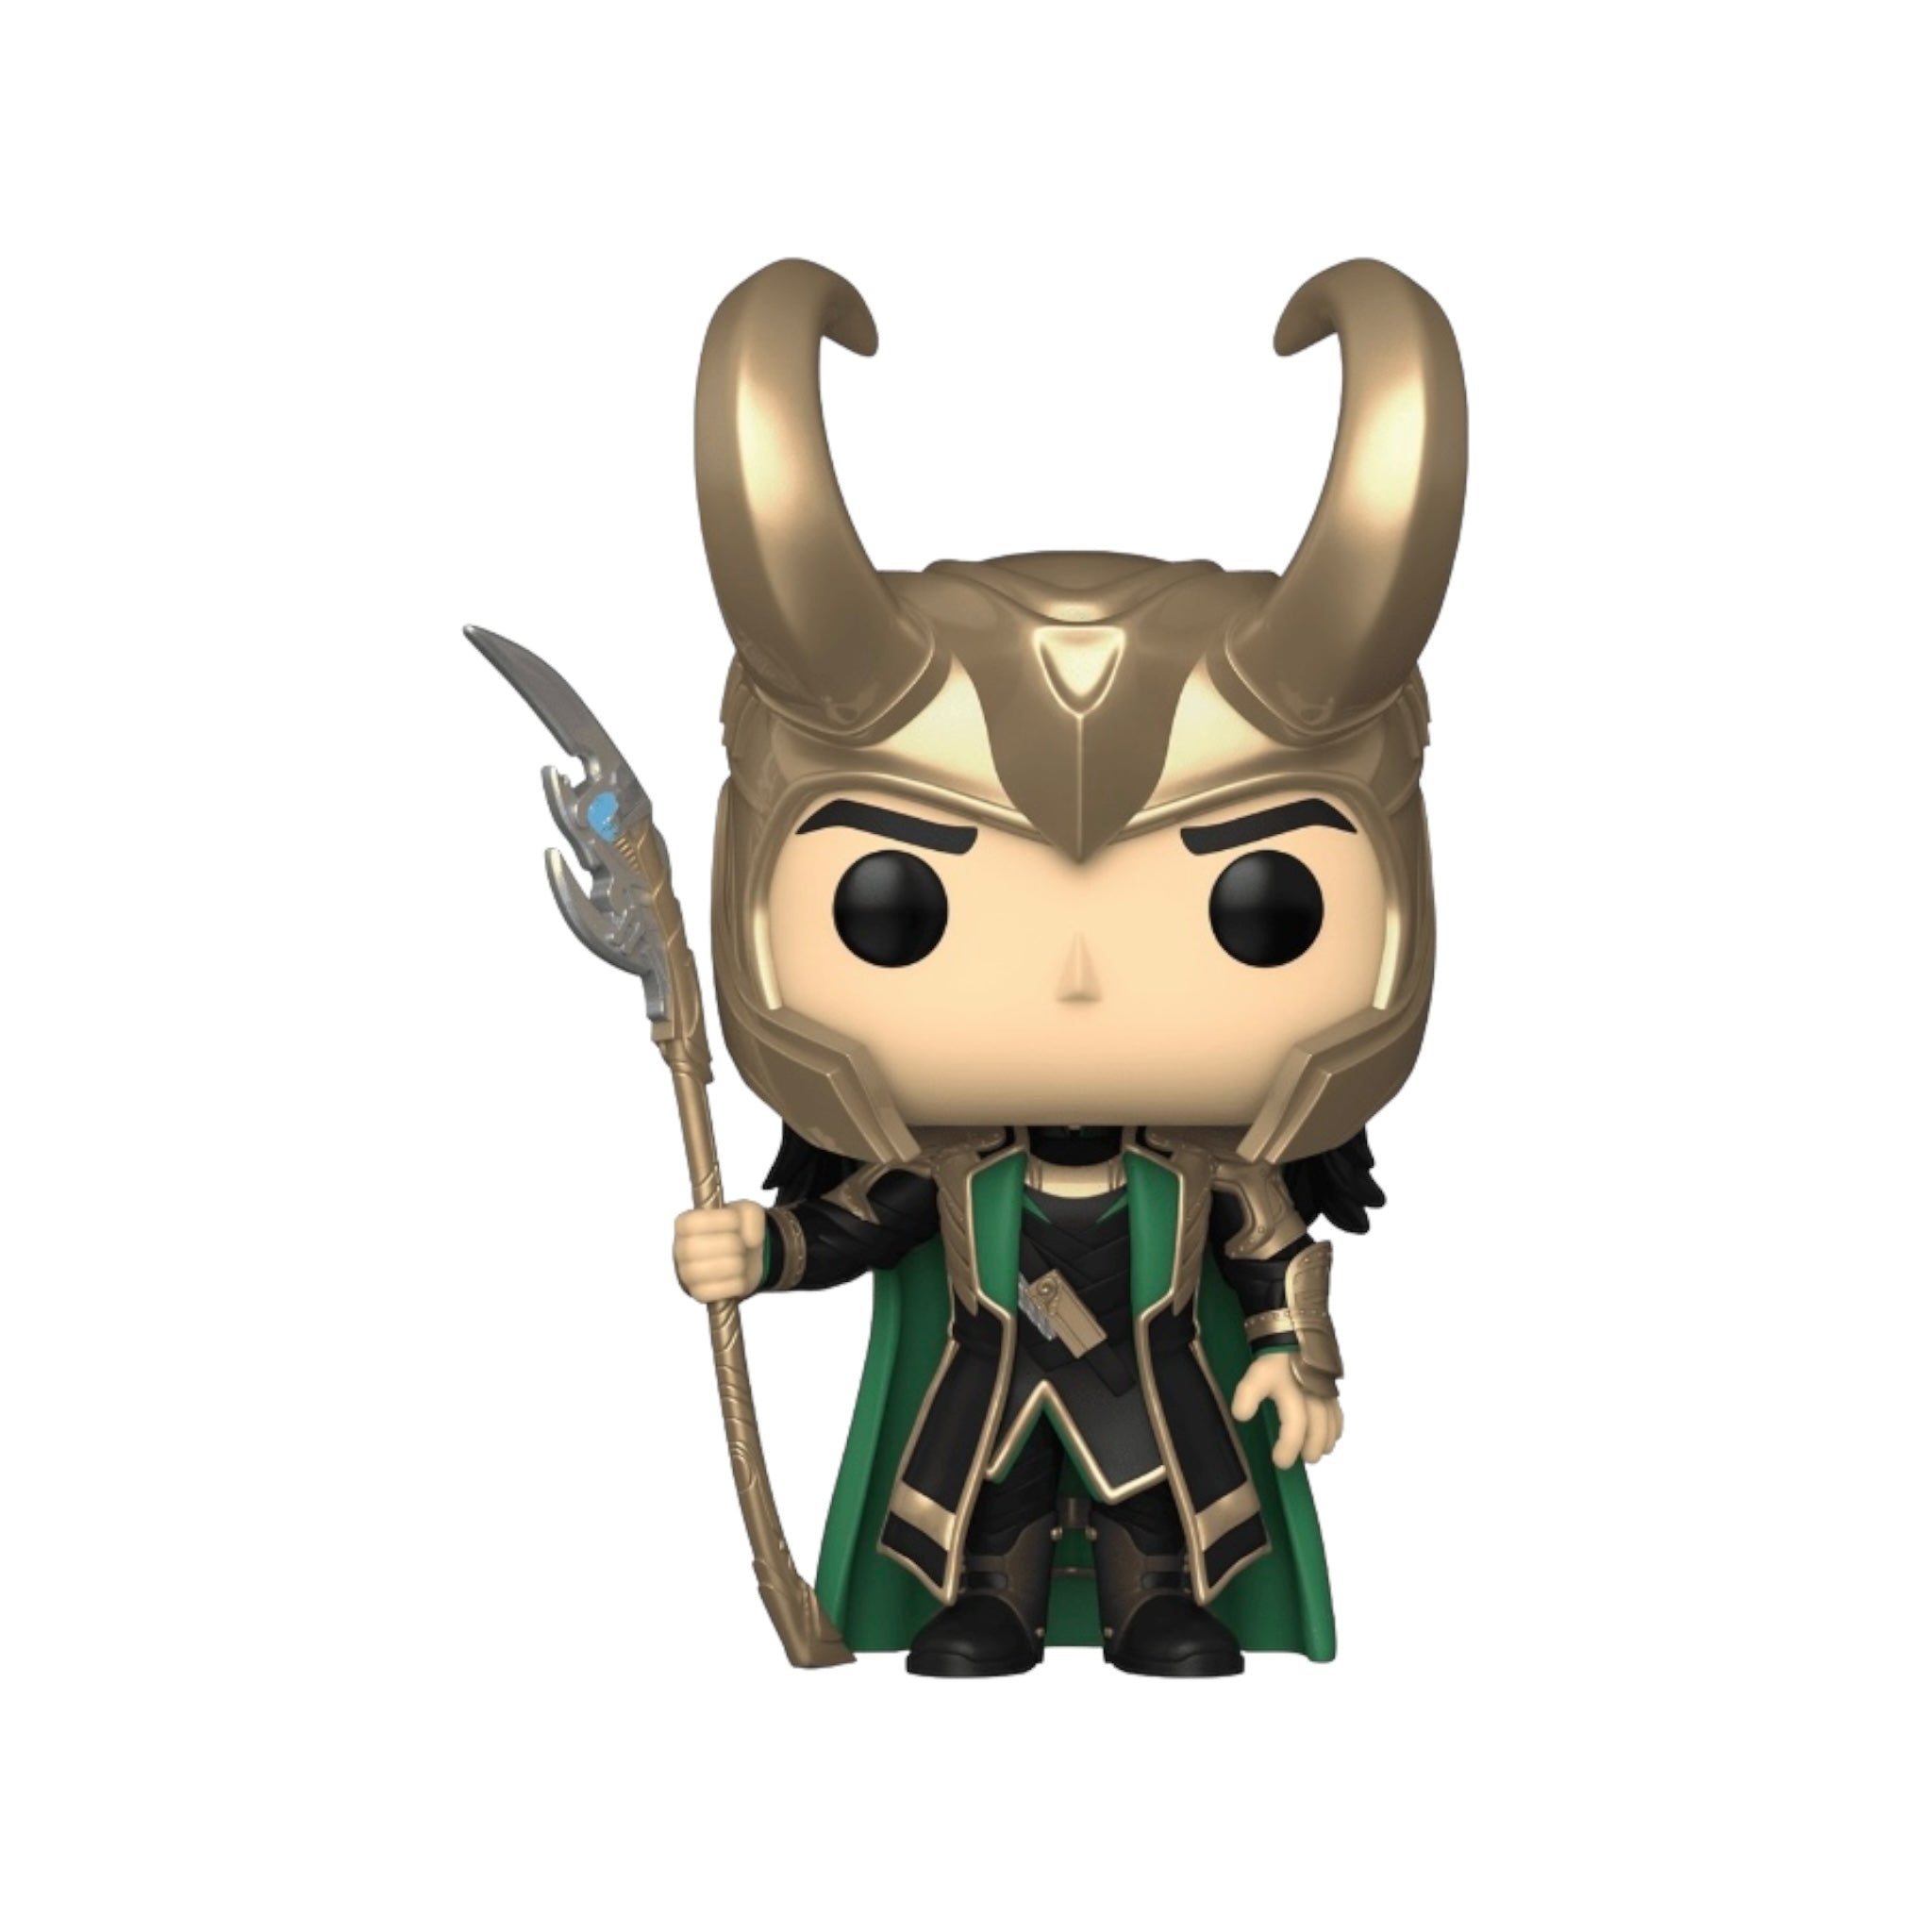 Loki with Scepter #985 (Glows in the Dark) Funko Pop! - The Avengers - Entertainment Earth Exclusive